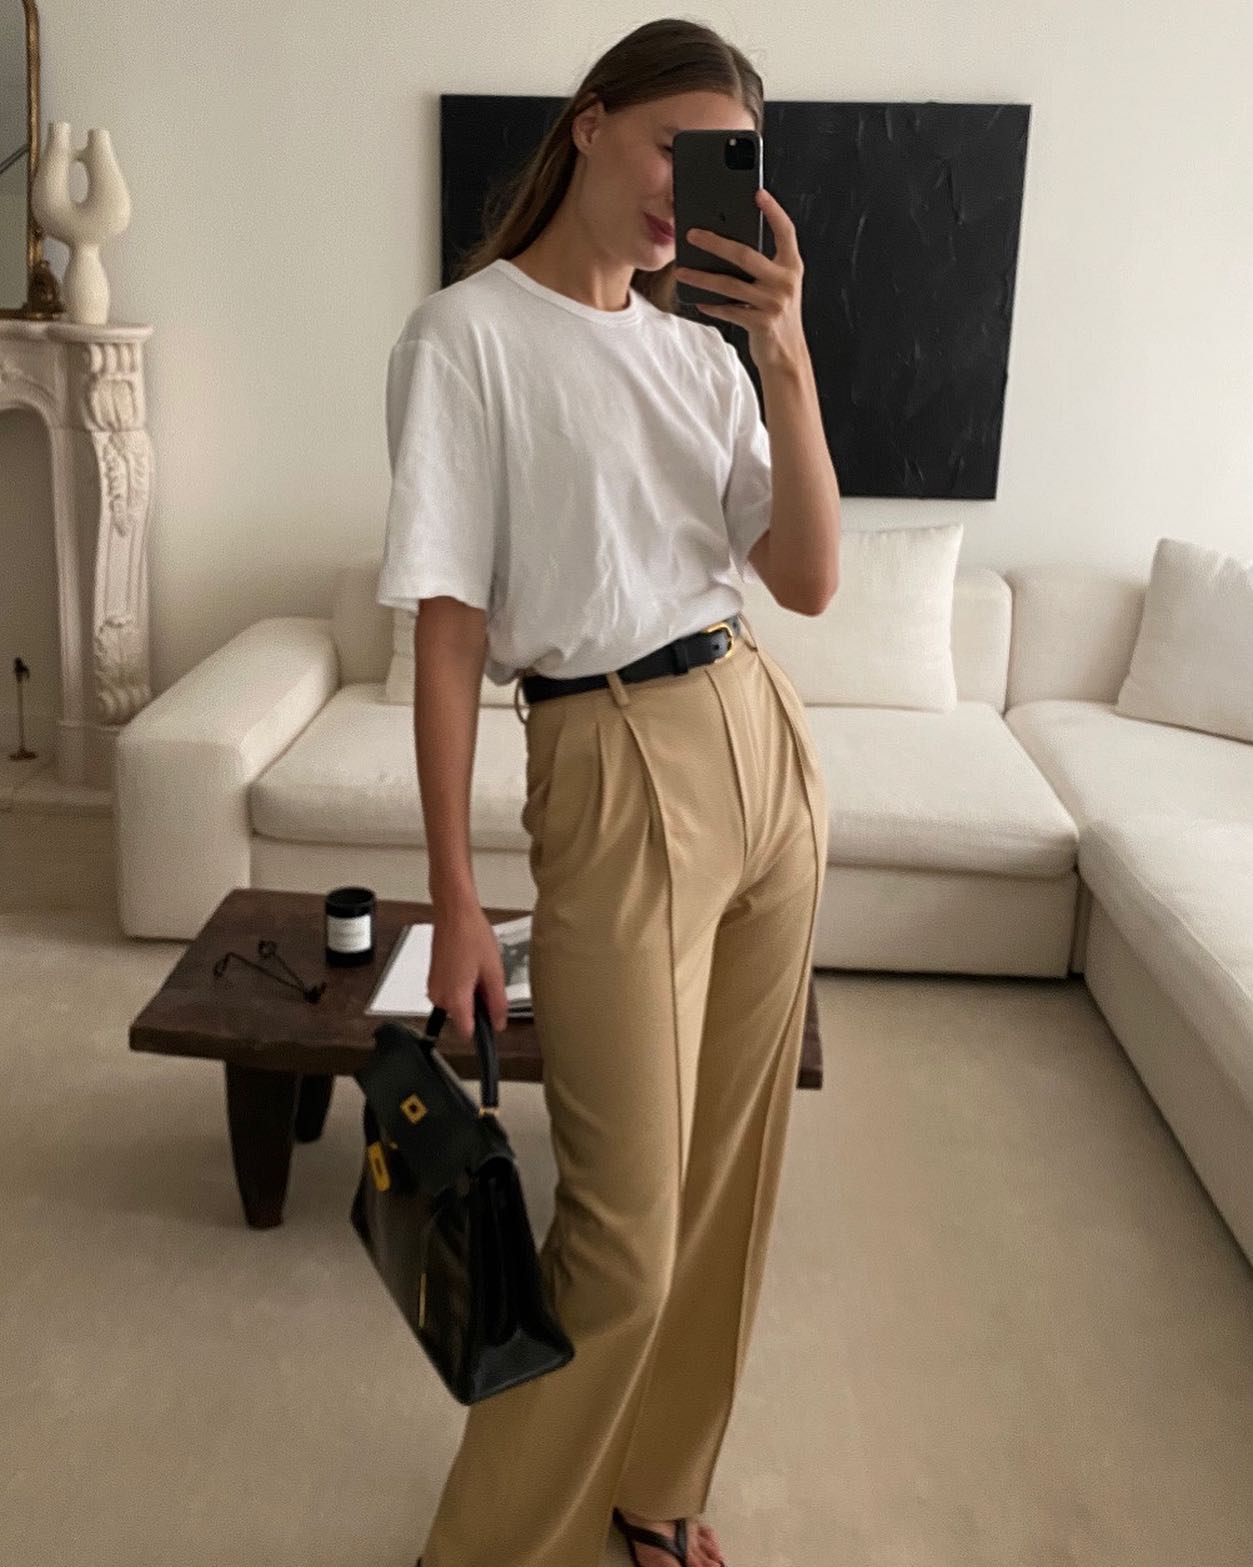 fashion influencer Christie Tyler poses for a mirror selfie wearing a white t-shirt, thin black belt, Hermes bag, tan pleated pants, and black flip-flop sandals